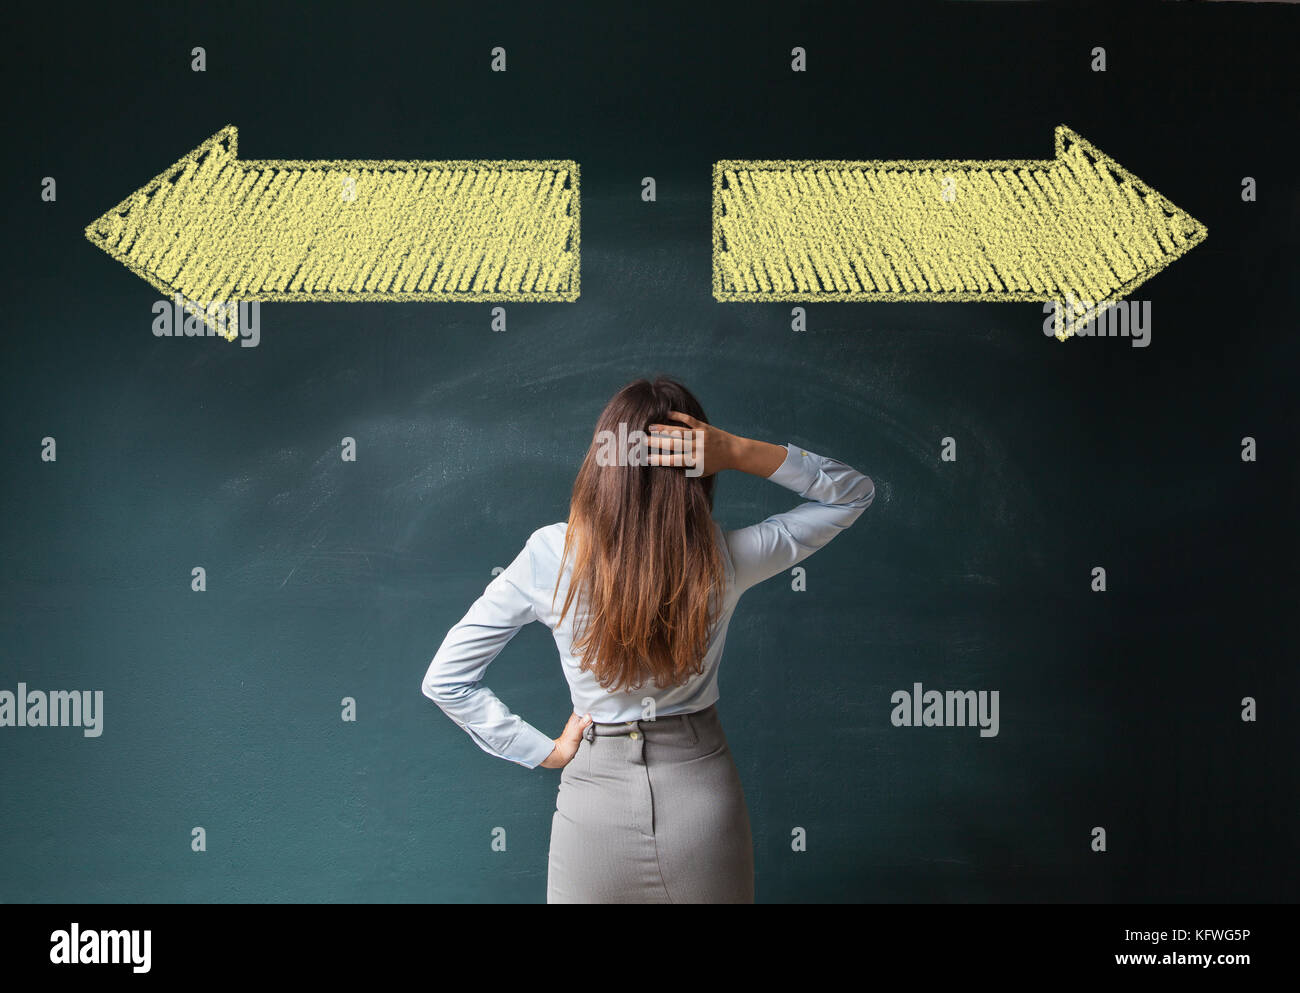 Business woman in front of a blackboard with arrows Stock Photo